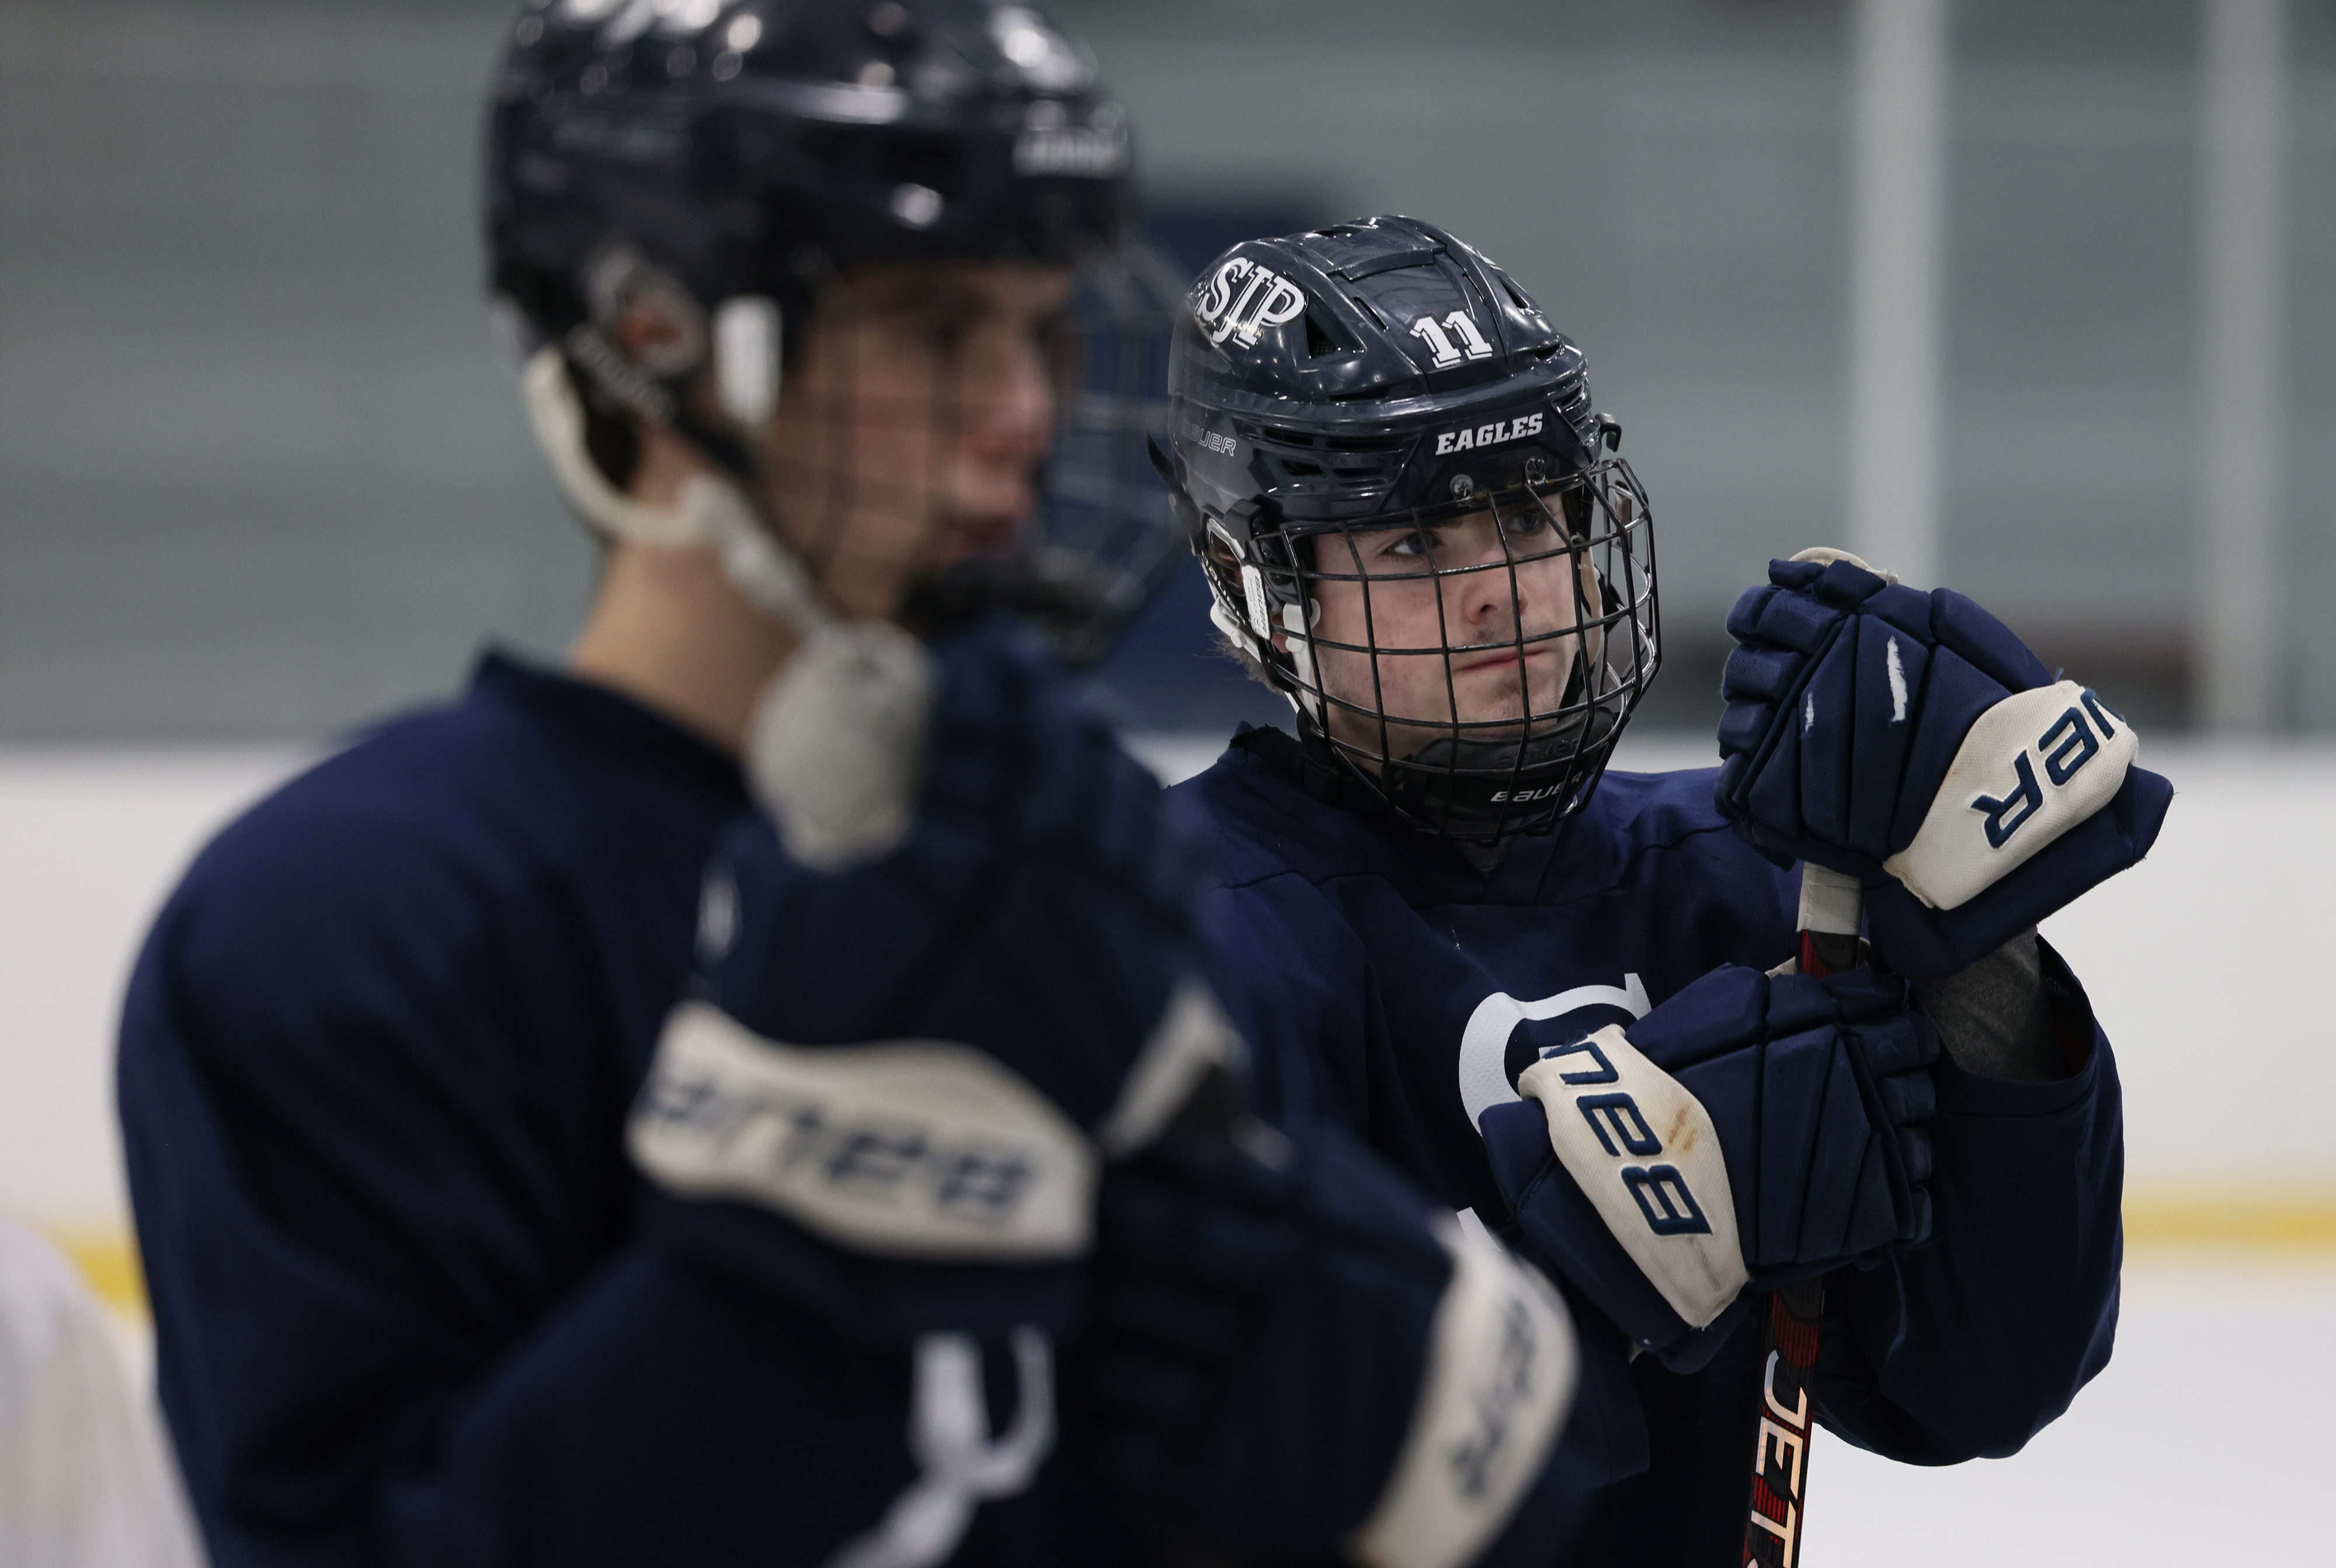 Previewing the Massachusetts boys hockey tournament, Divisions 1-4